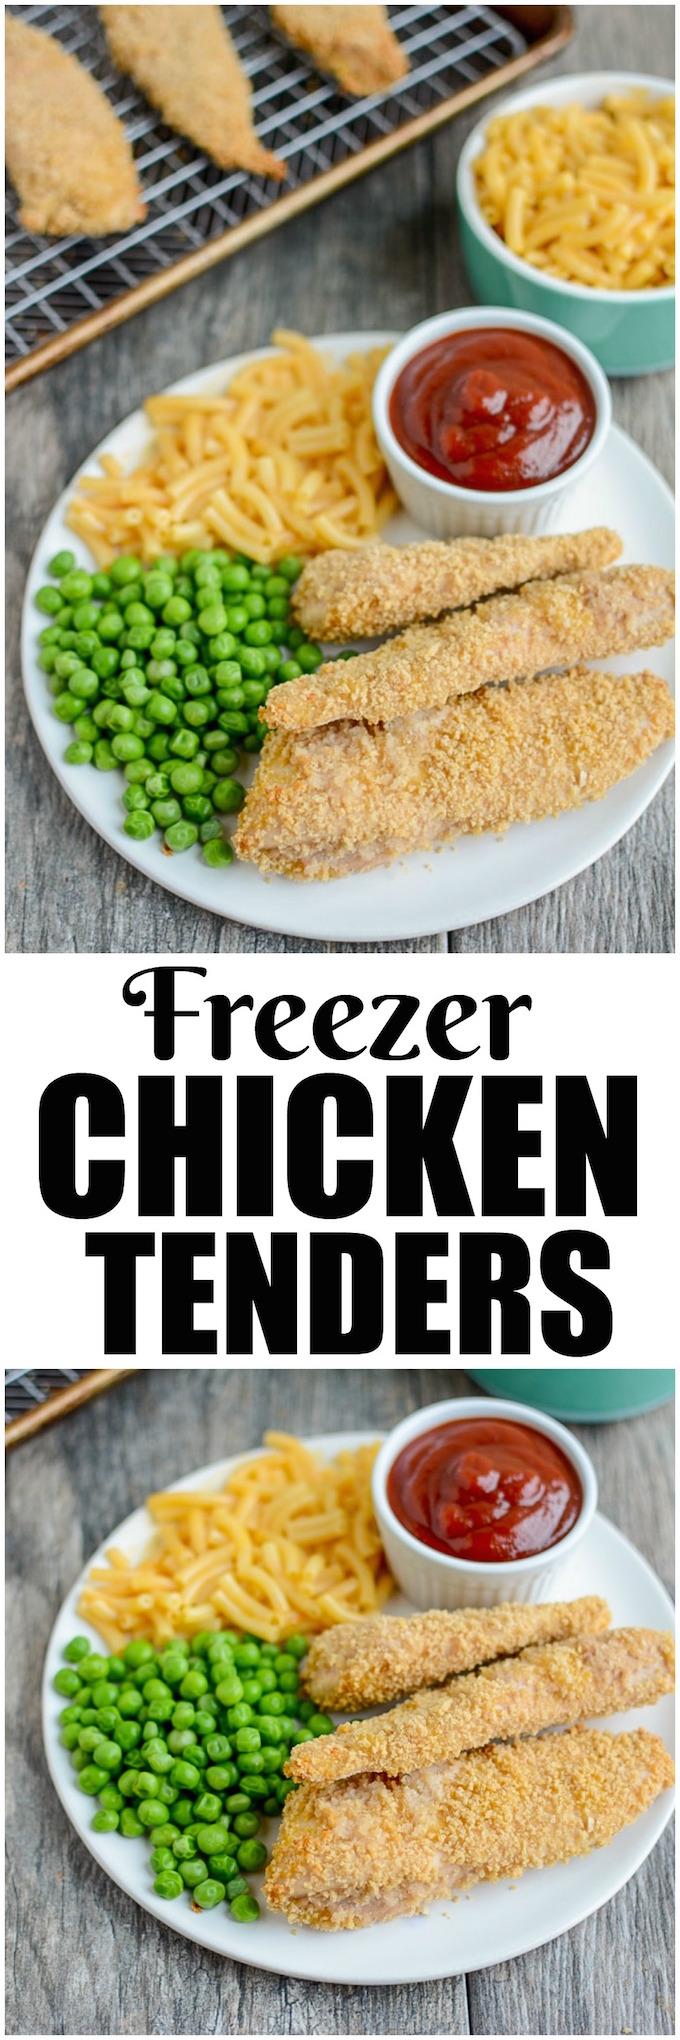 These Freezer Chicken Tenders are perfect for meal prep. Make several batches ahead of time and stick them in the freezer. On a busy night, just pull them out, bake from frozen and have dinner on the table in 30 minutes!